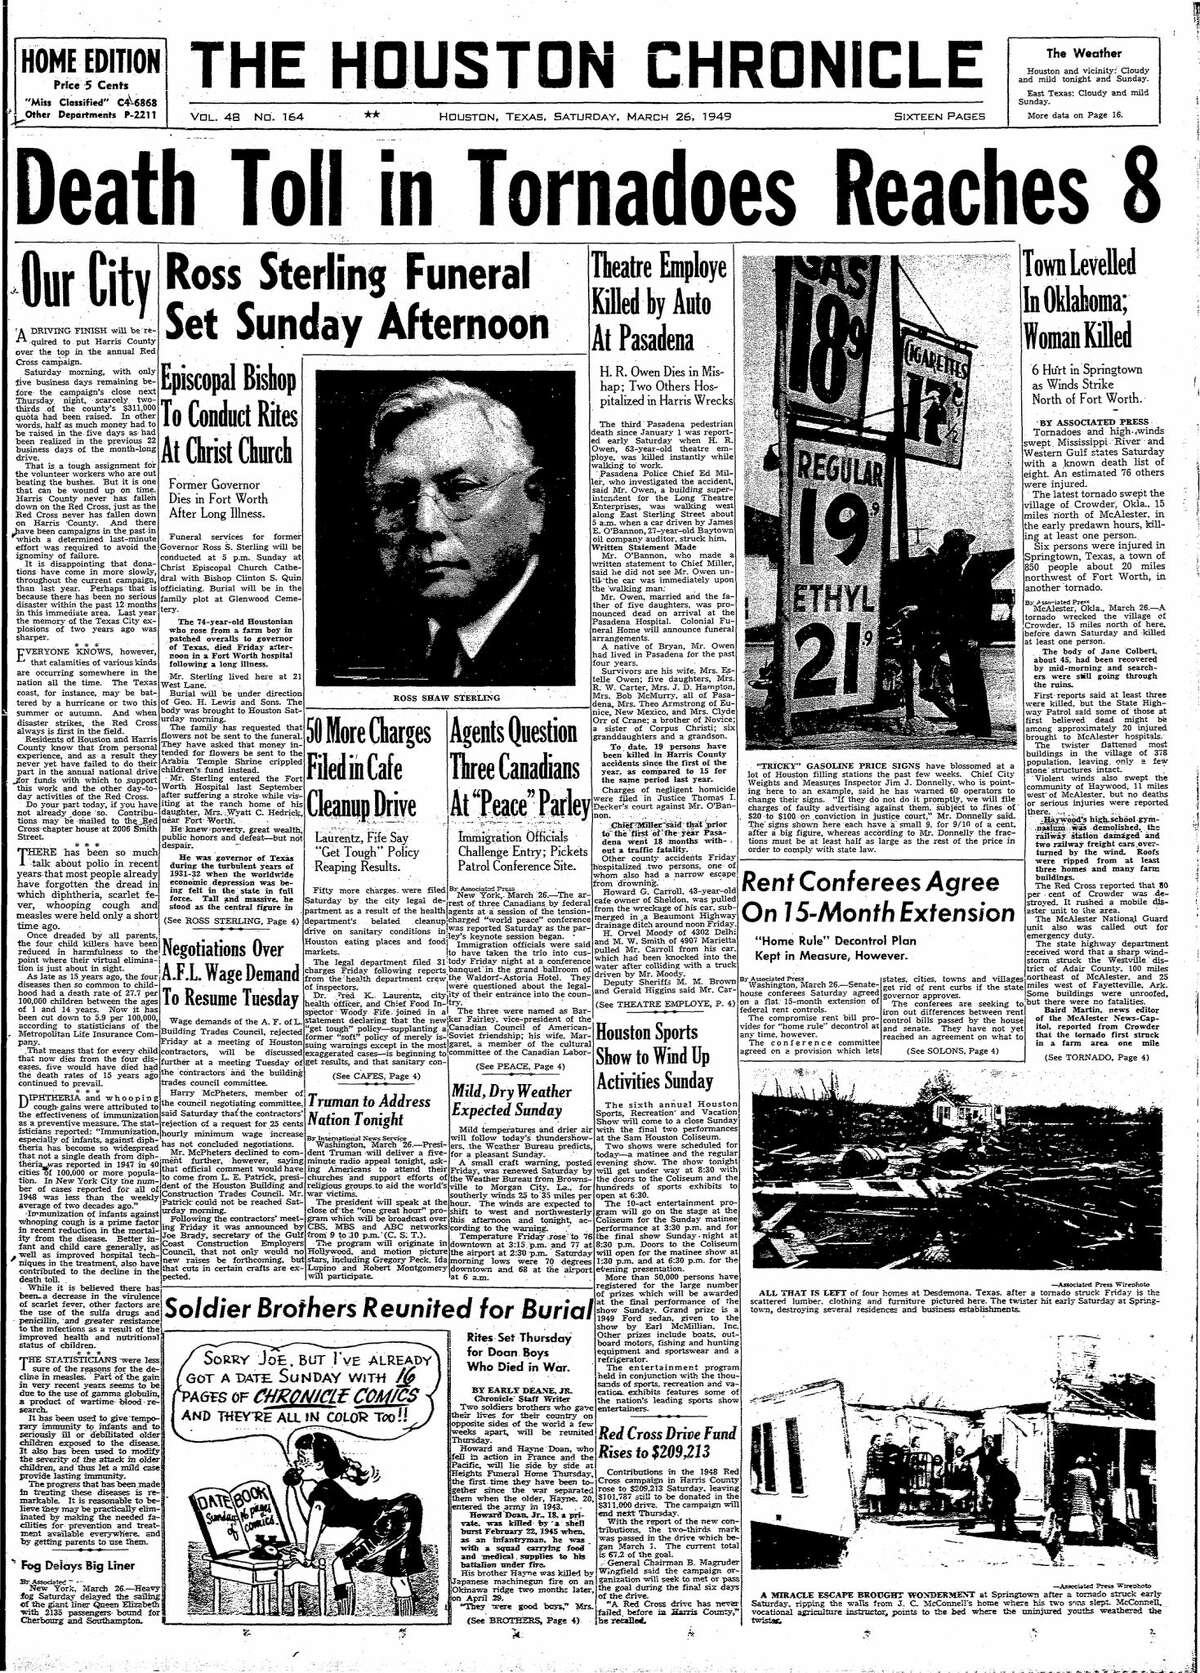 Houston Chronicle front page from March 26, 1949.